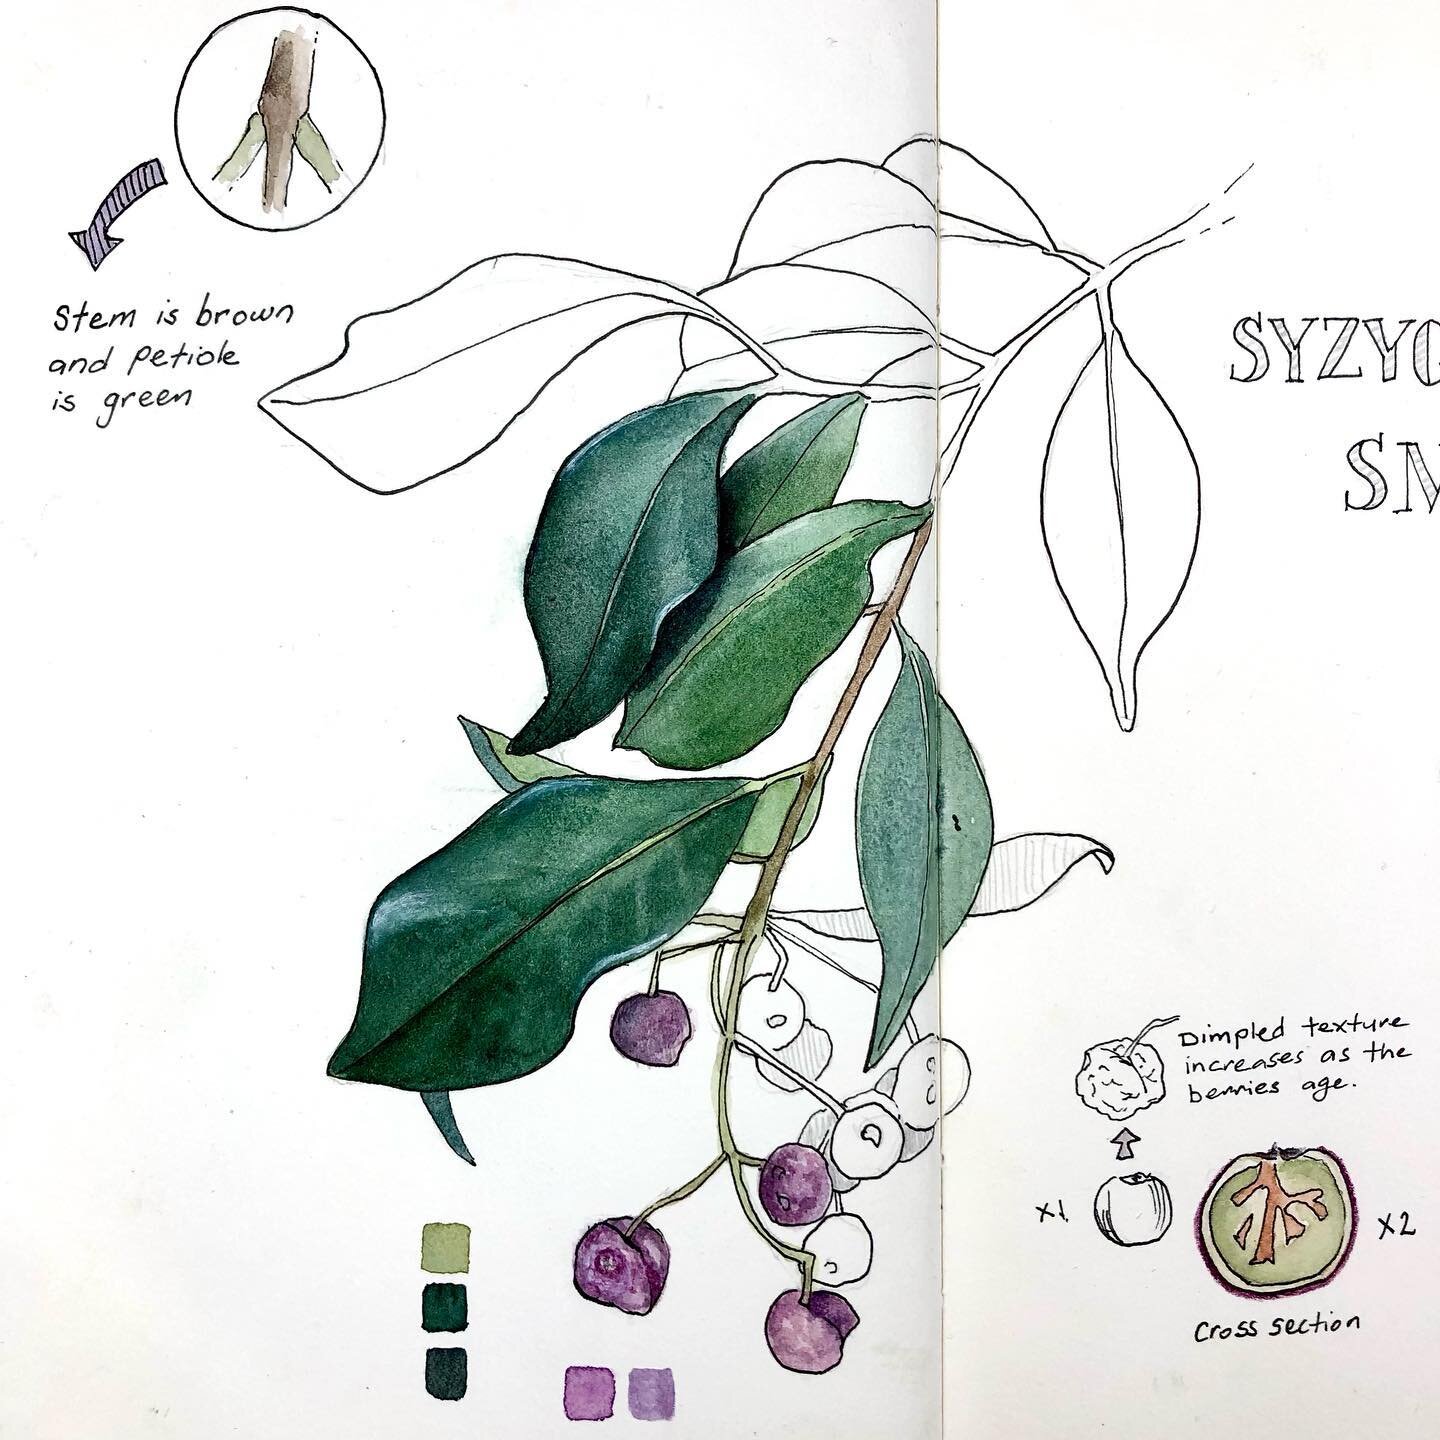 It was deeply relaxing to spend some time sketching and painting this specimen, which turns out to be a lilly pilly (Syzygium smithii, I think). The branches were hanging over the fence of a property near here and the fruits were so beautiful that I 